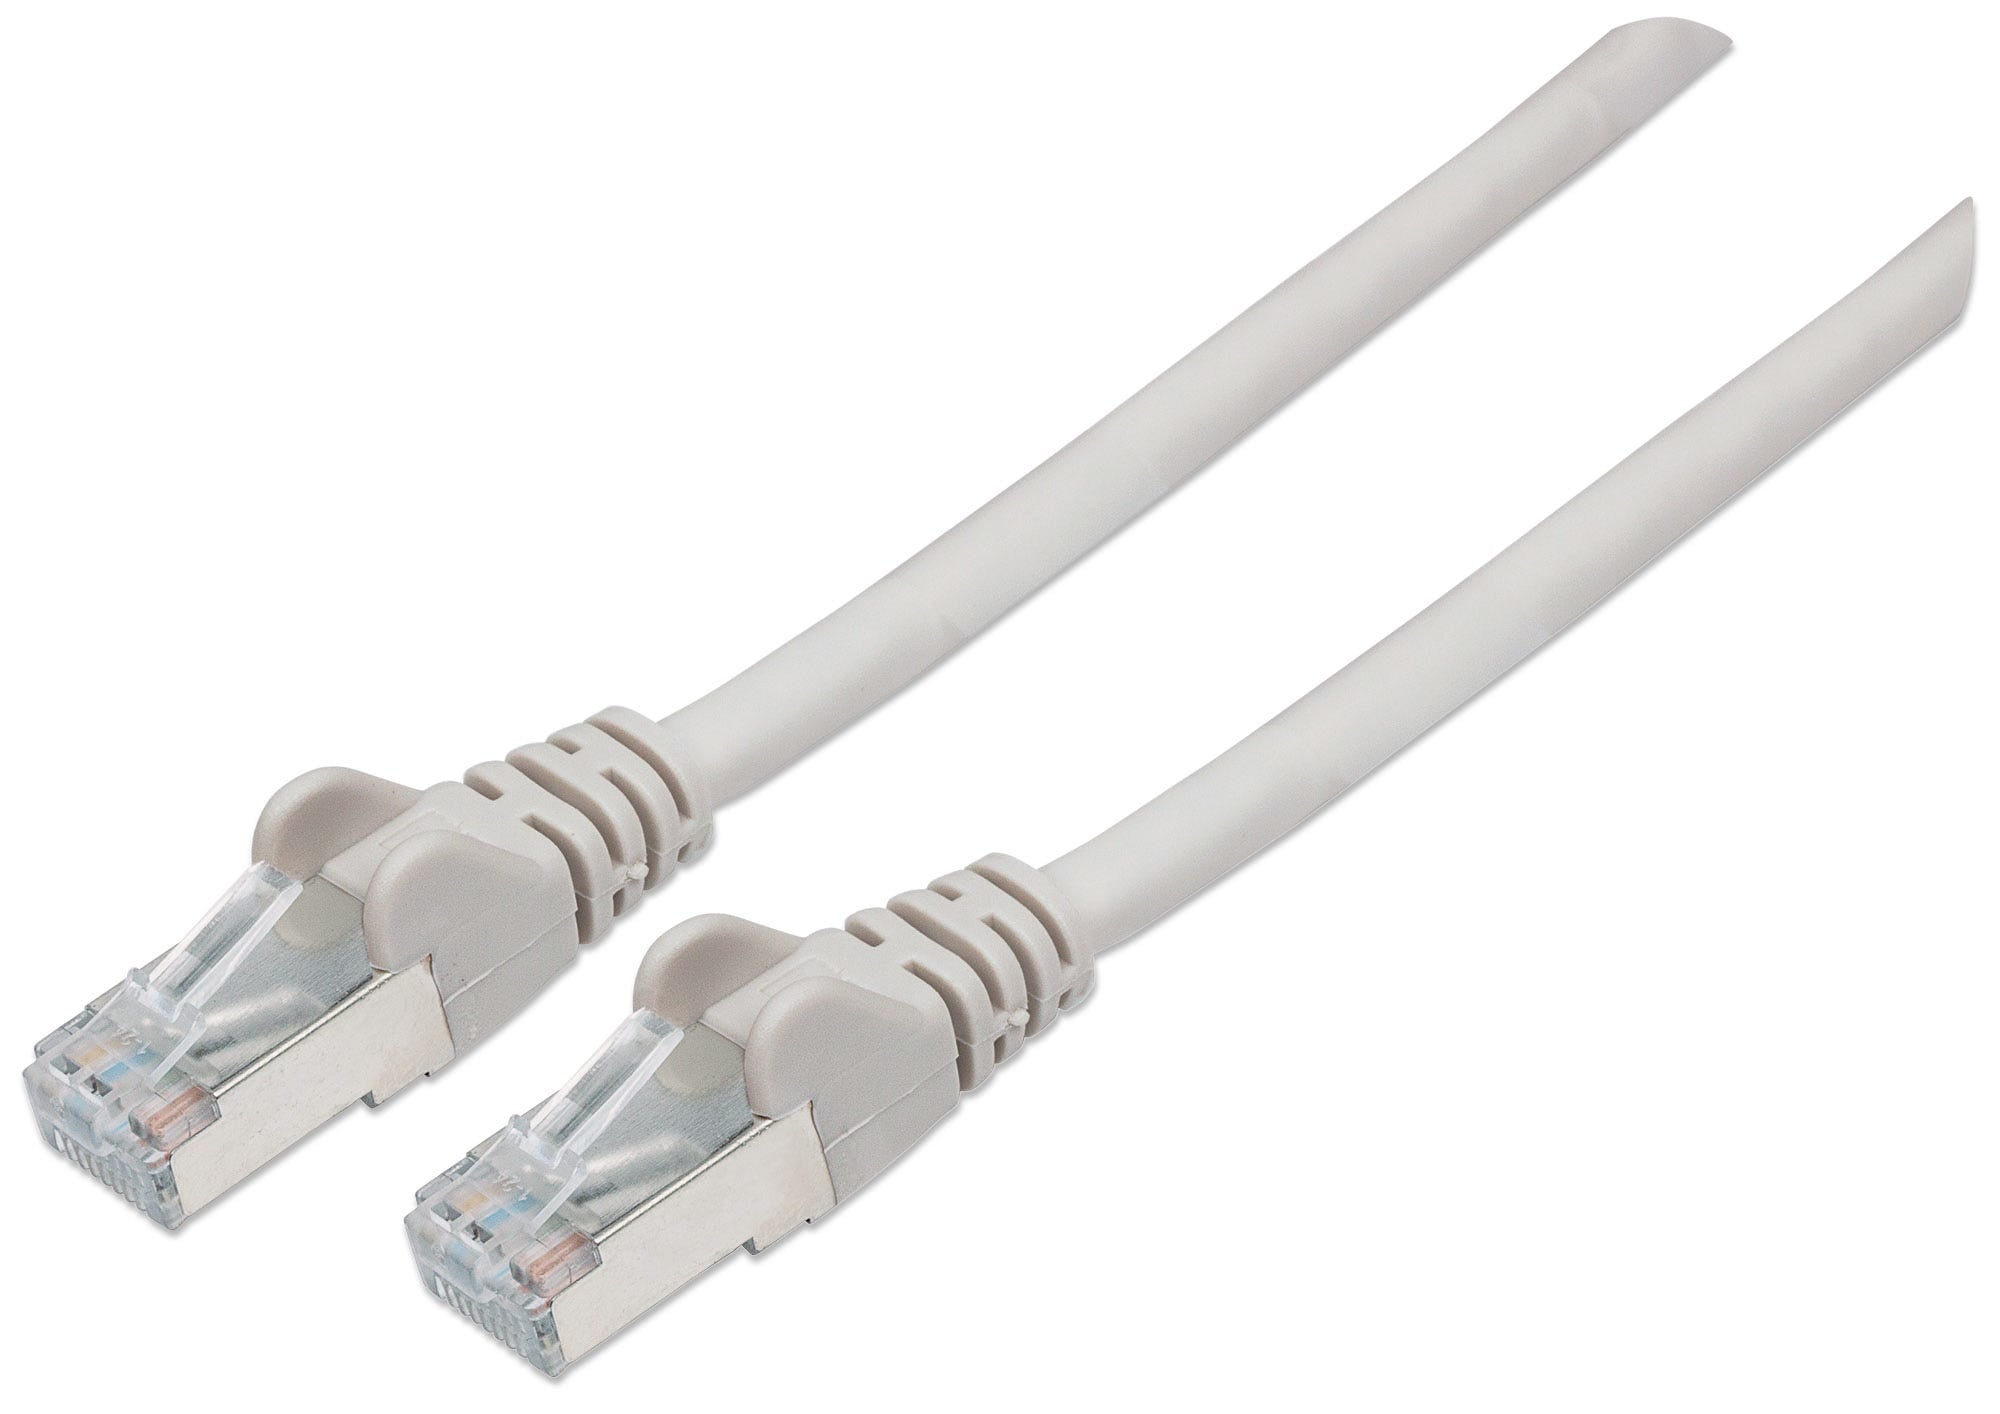 Intellinet Network Patch Cable, Cat6A, 5m, Grey, Copper, S/FTP, LSOH / LSZH, PVC, RJ45, Gold Plated Contacts, Snagless, Booted, Lifetime Warranty, Polybag